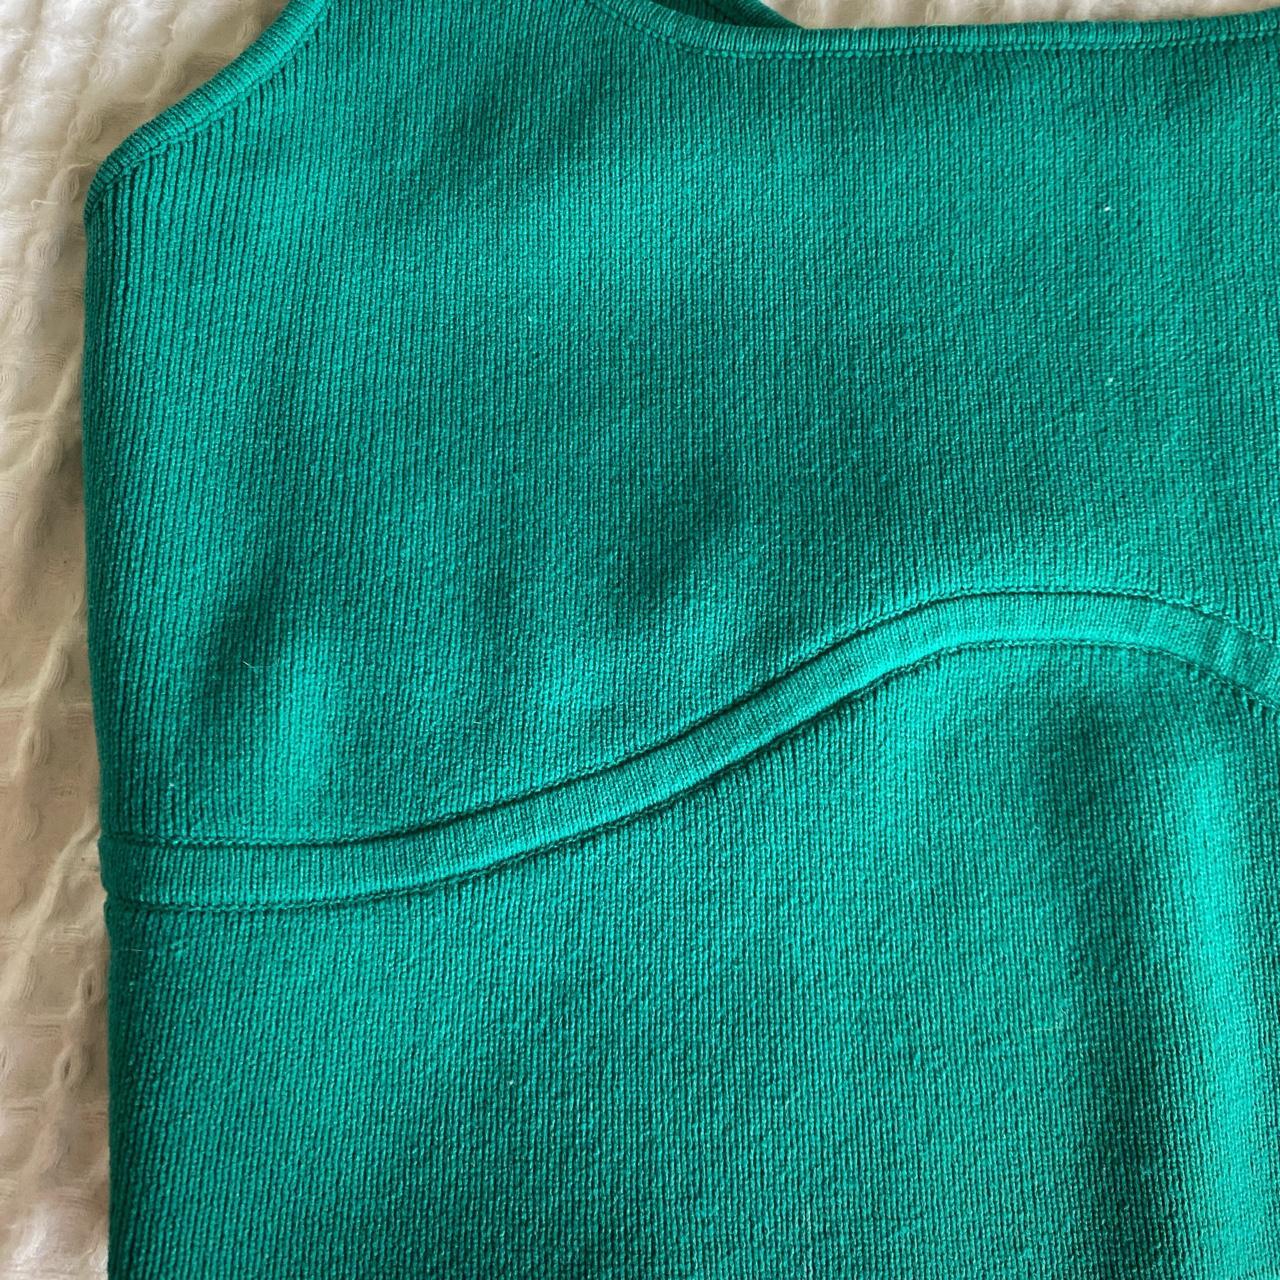 greeny-teal crop top perfect condition, slightly... - Depop